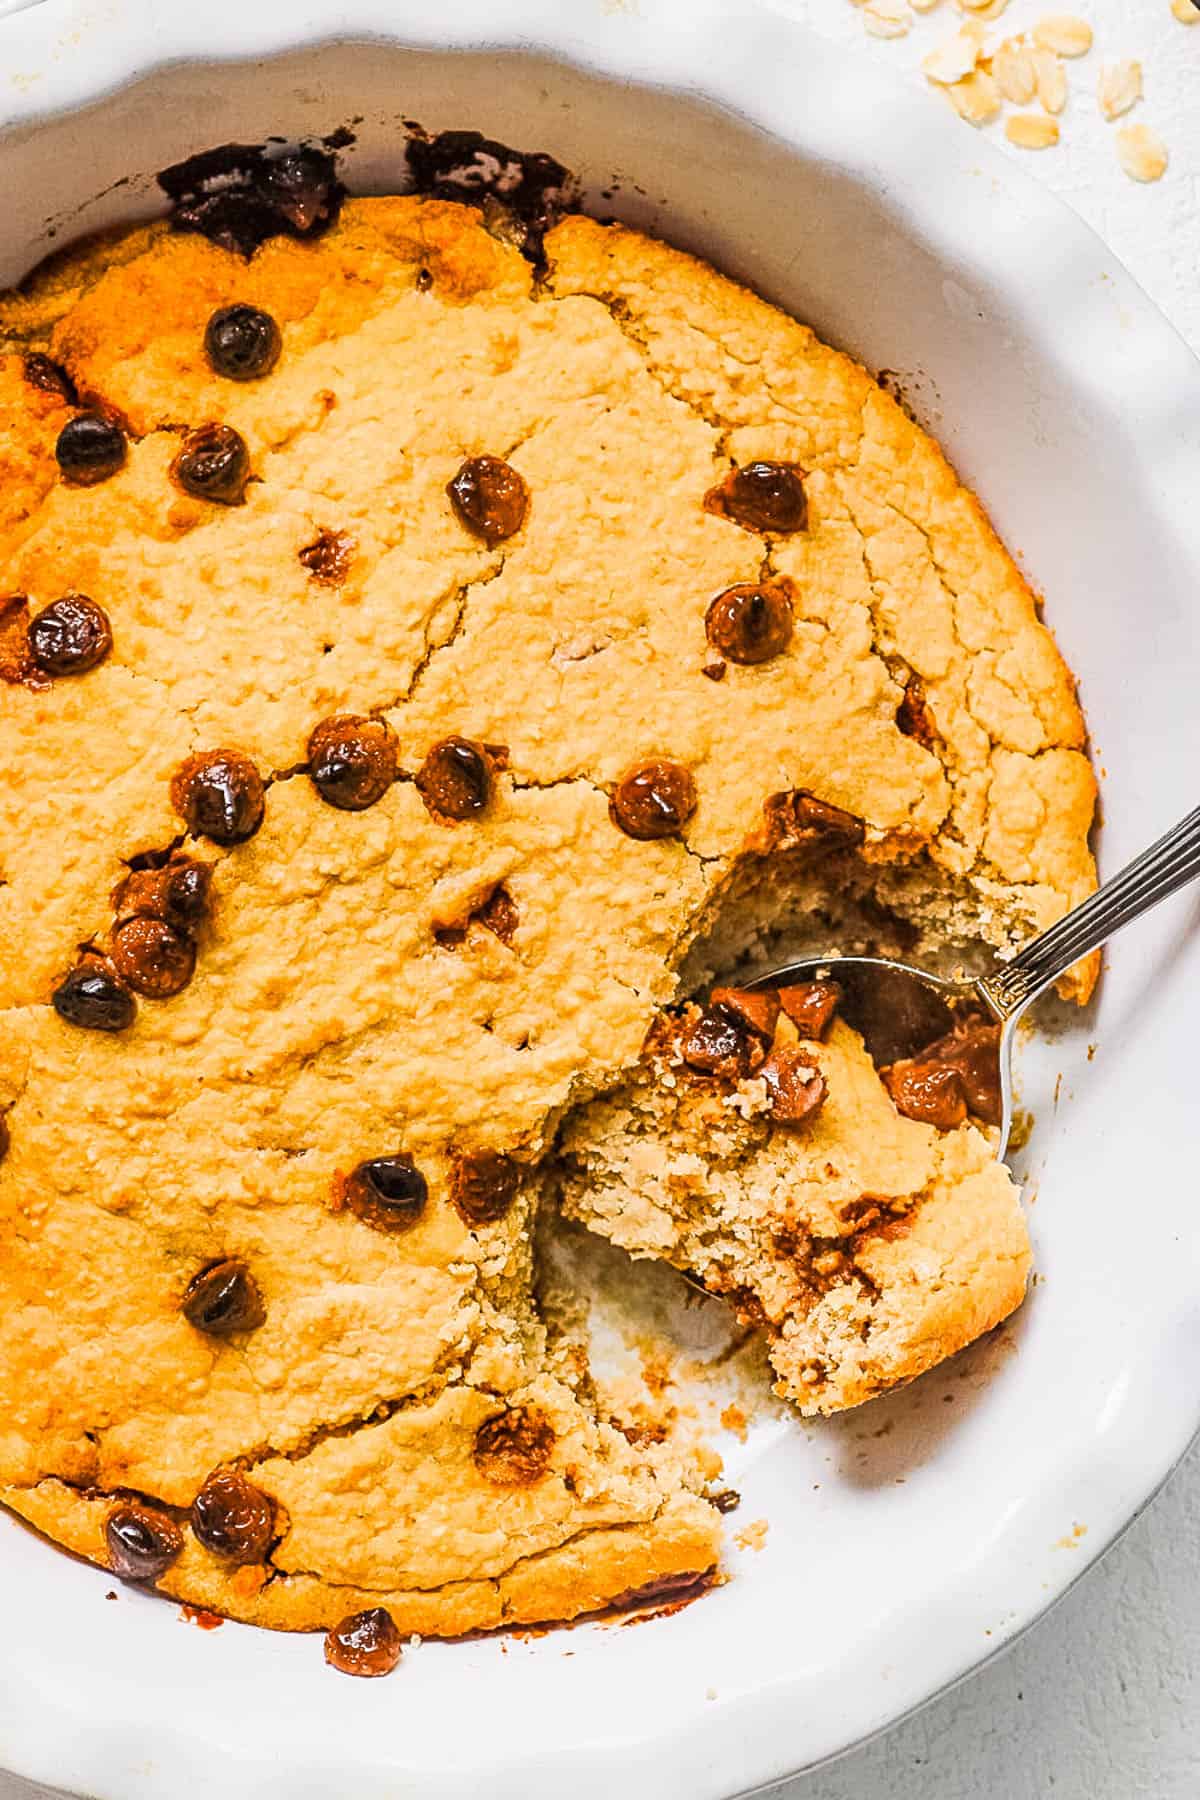 Easy chocolate chip baked oatmeal in a white baking dish.